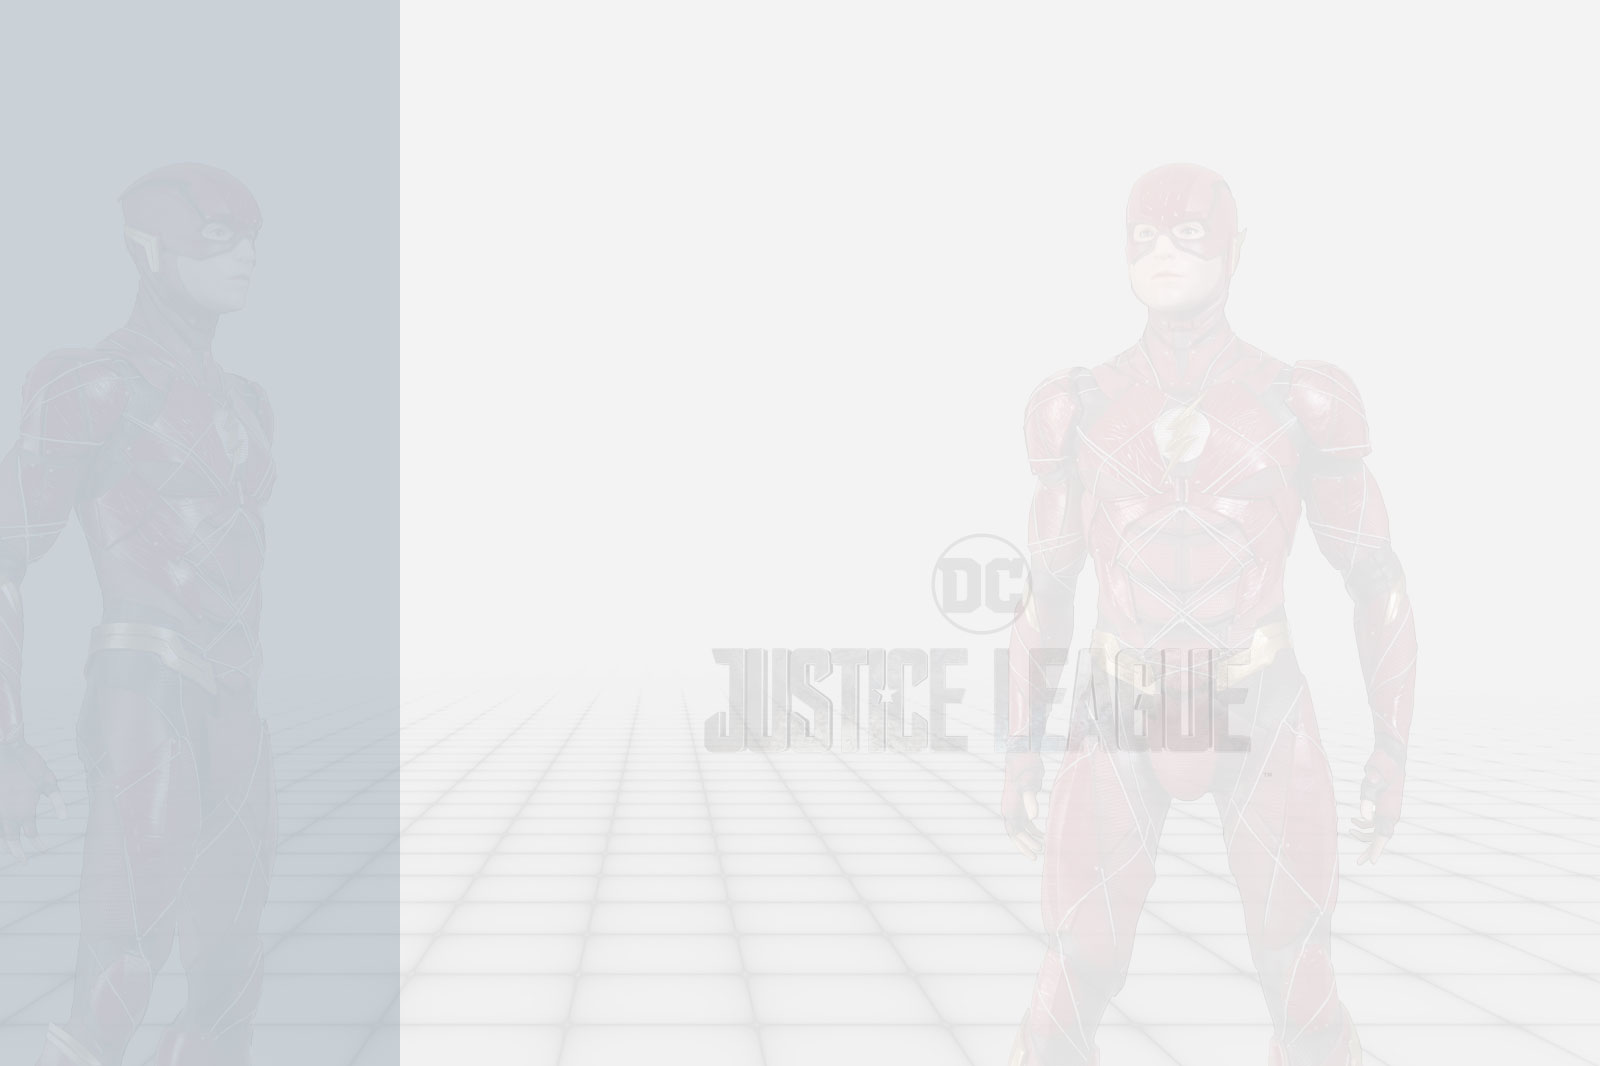 Justice League – The Flash